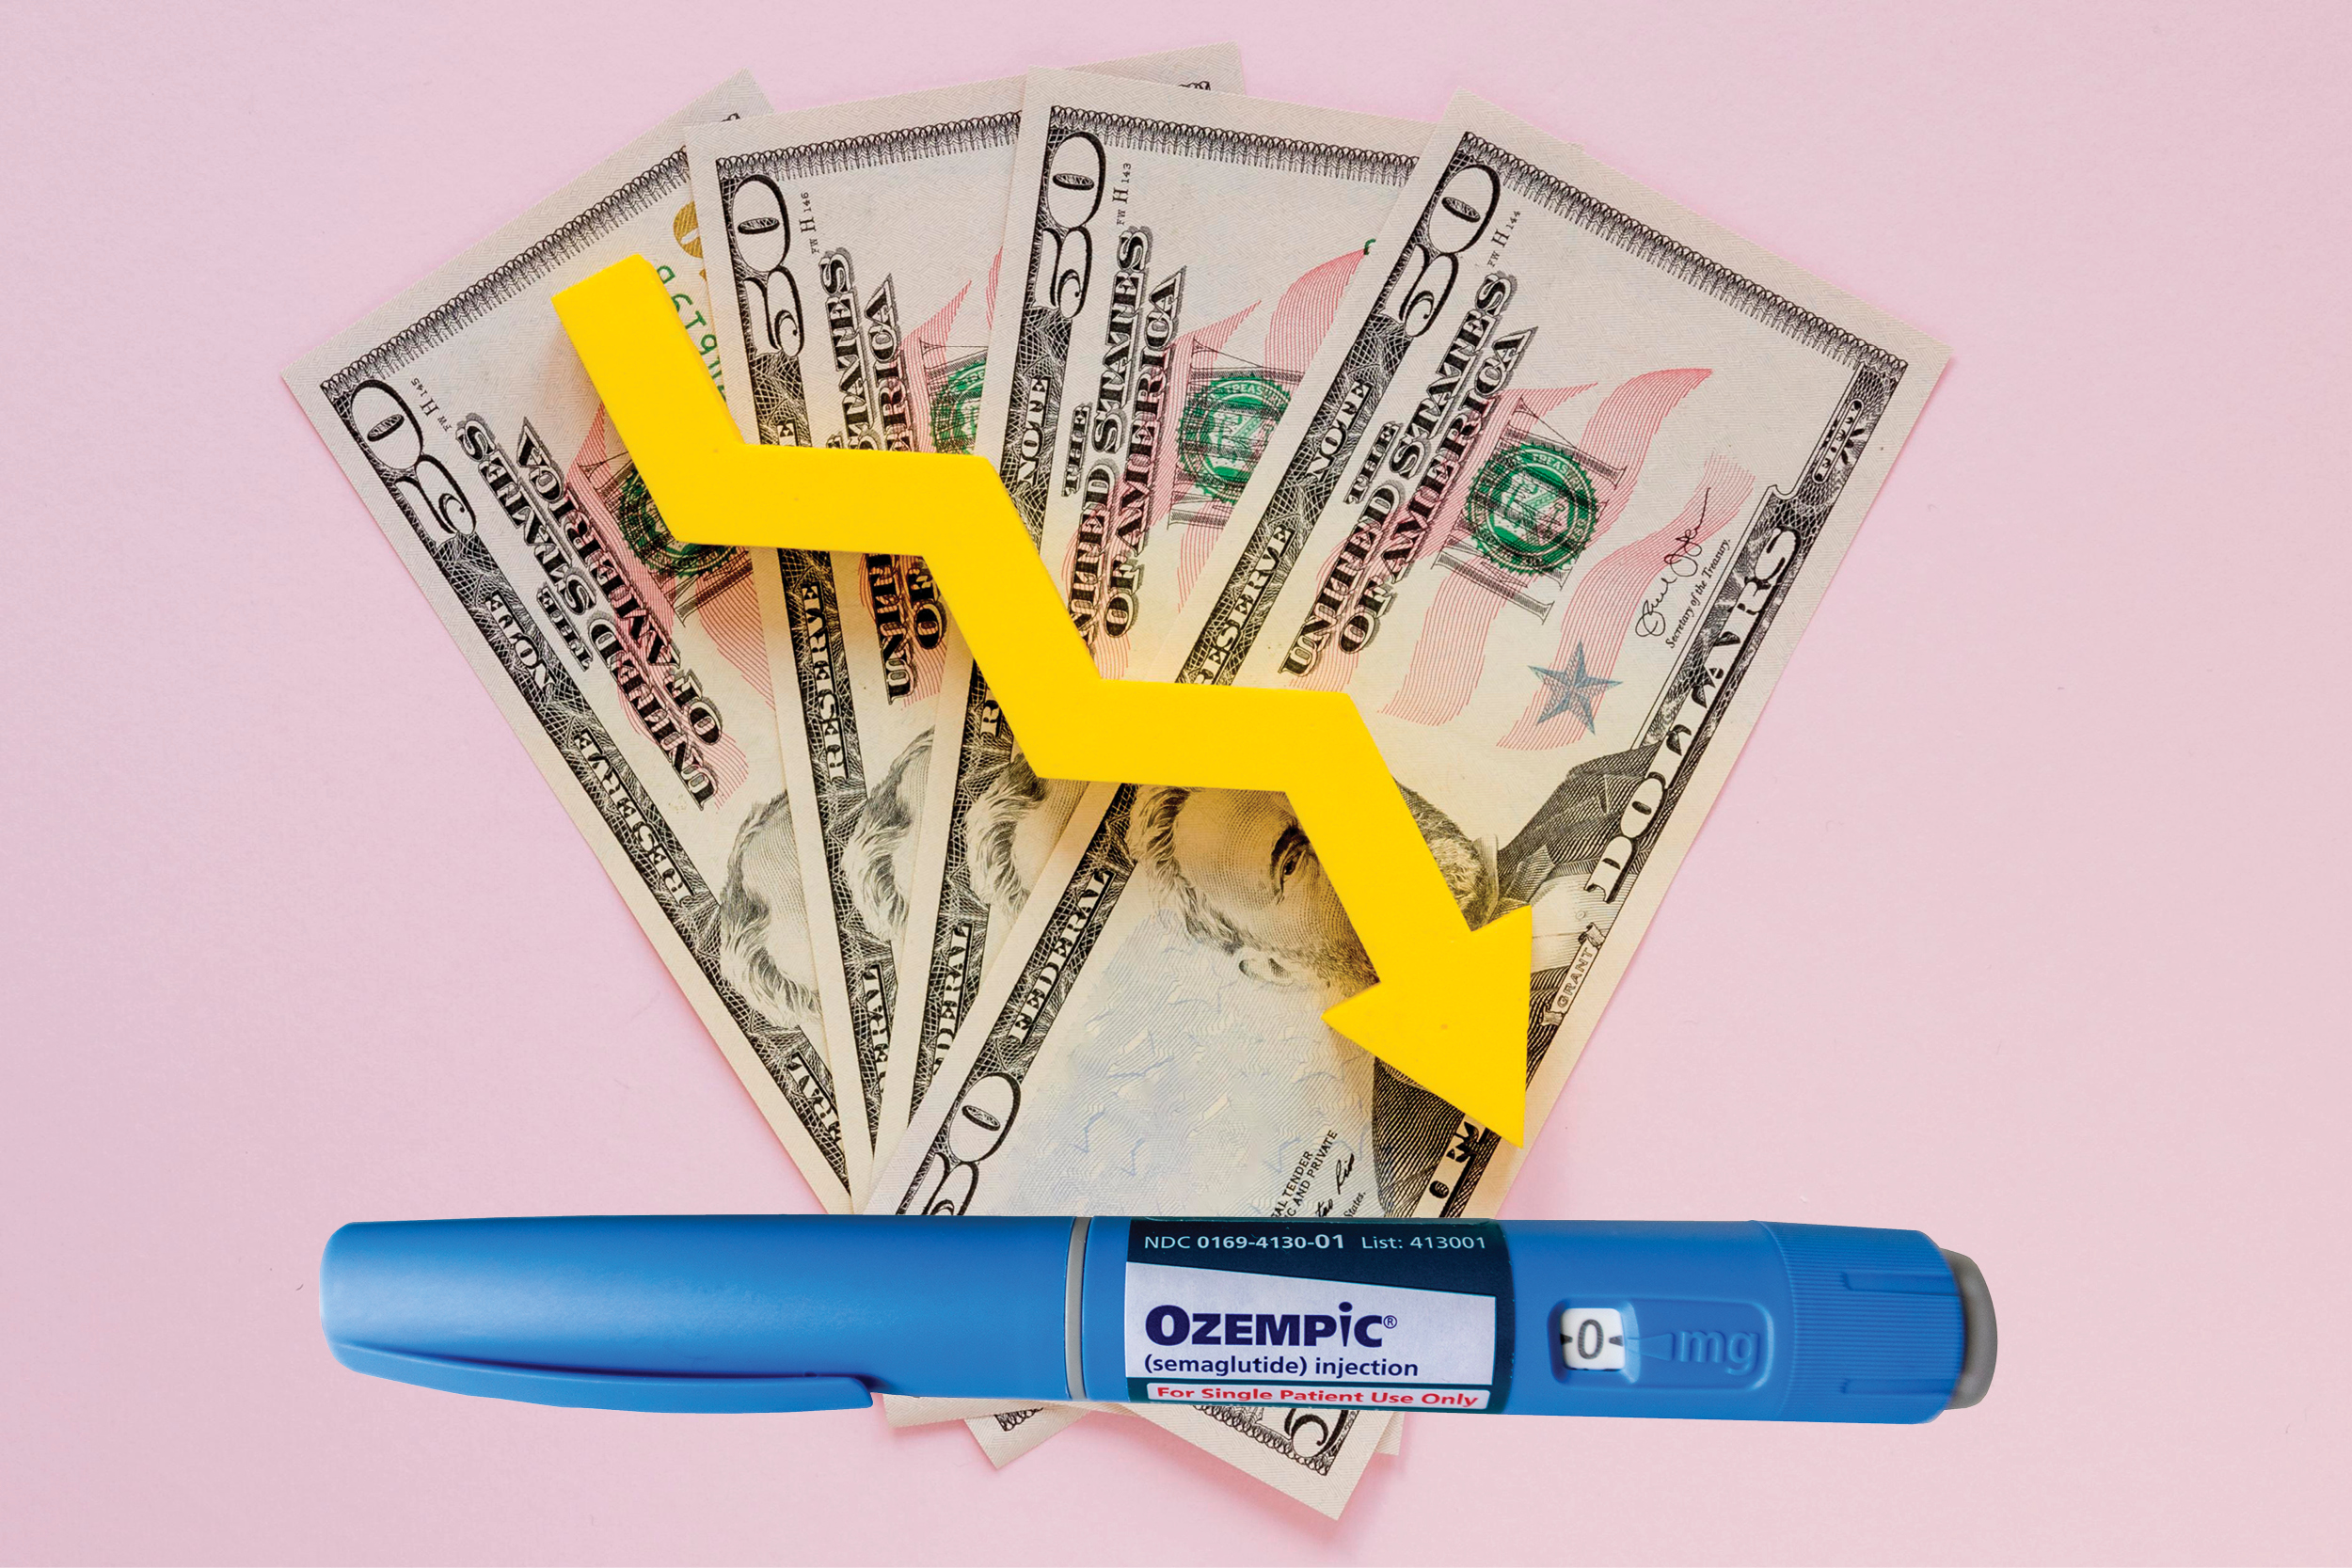 Downward symbol over money and ozempic weight loss injectable pen